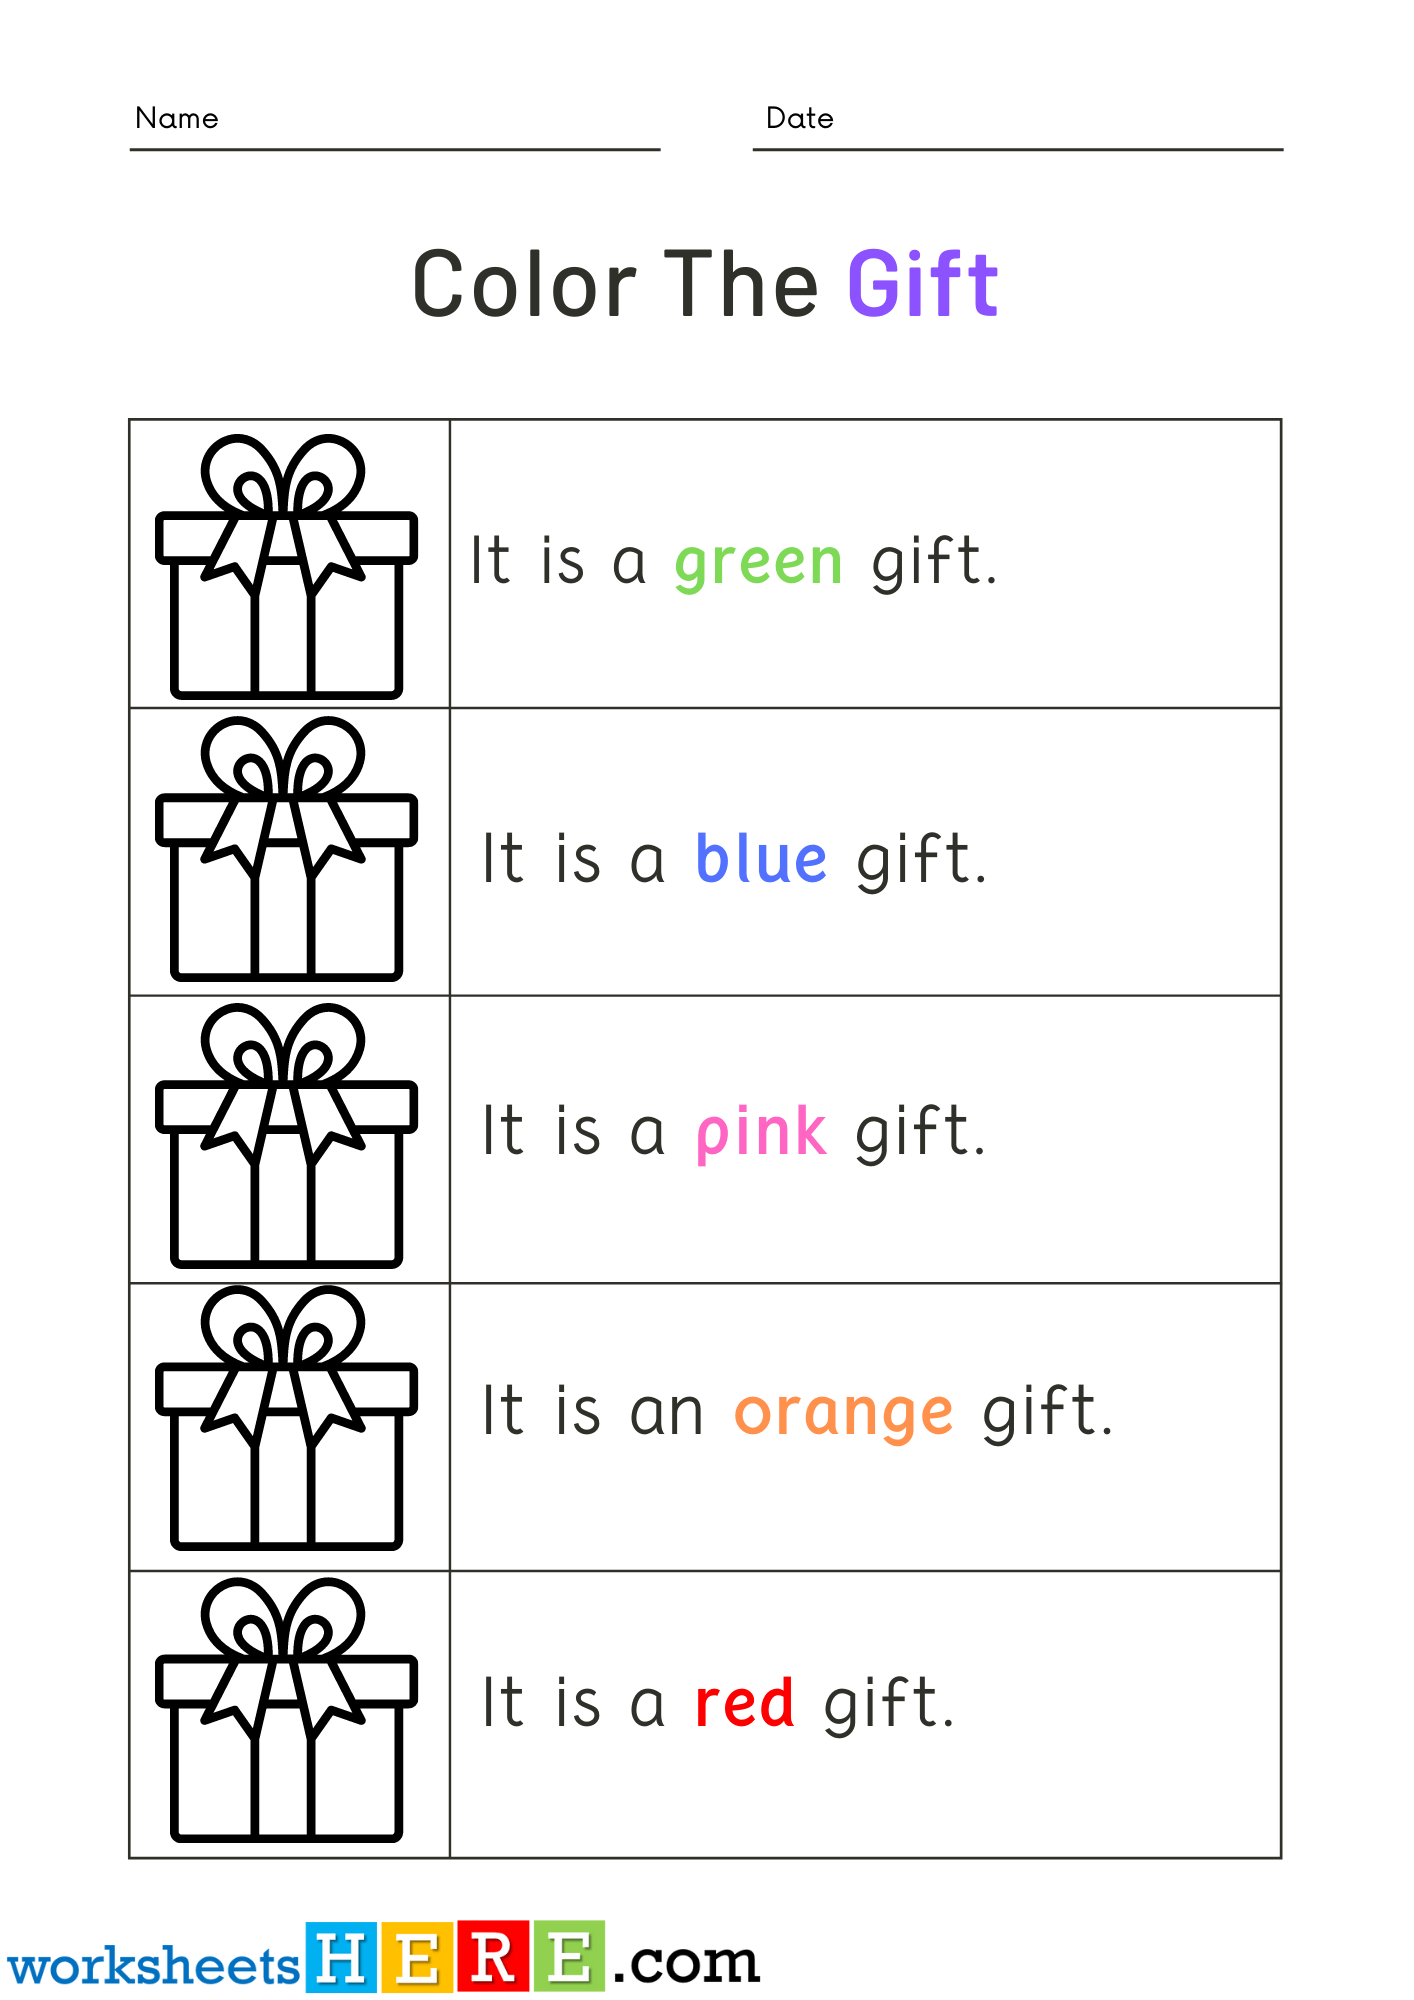 Read Words and Color Gift Pictures Activity PDF Worksheets For Kindergarten